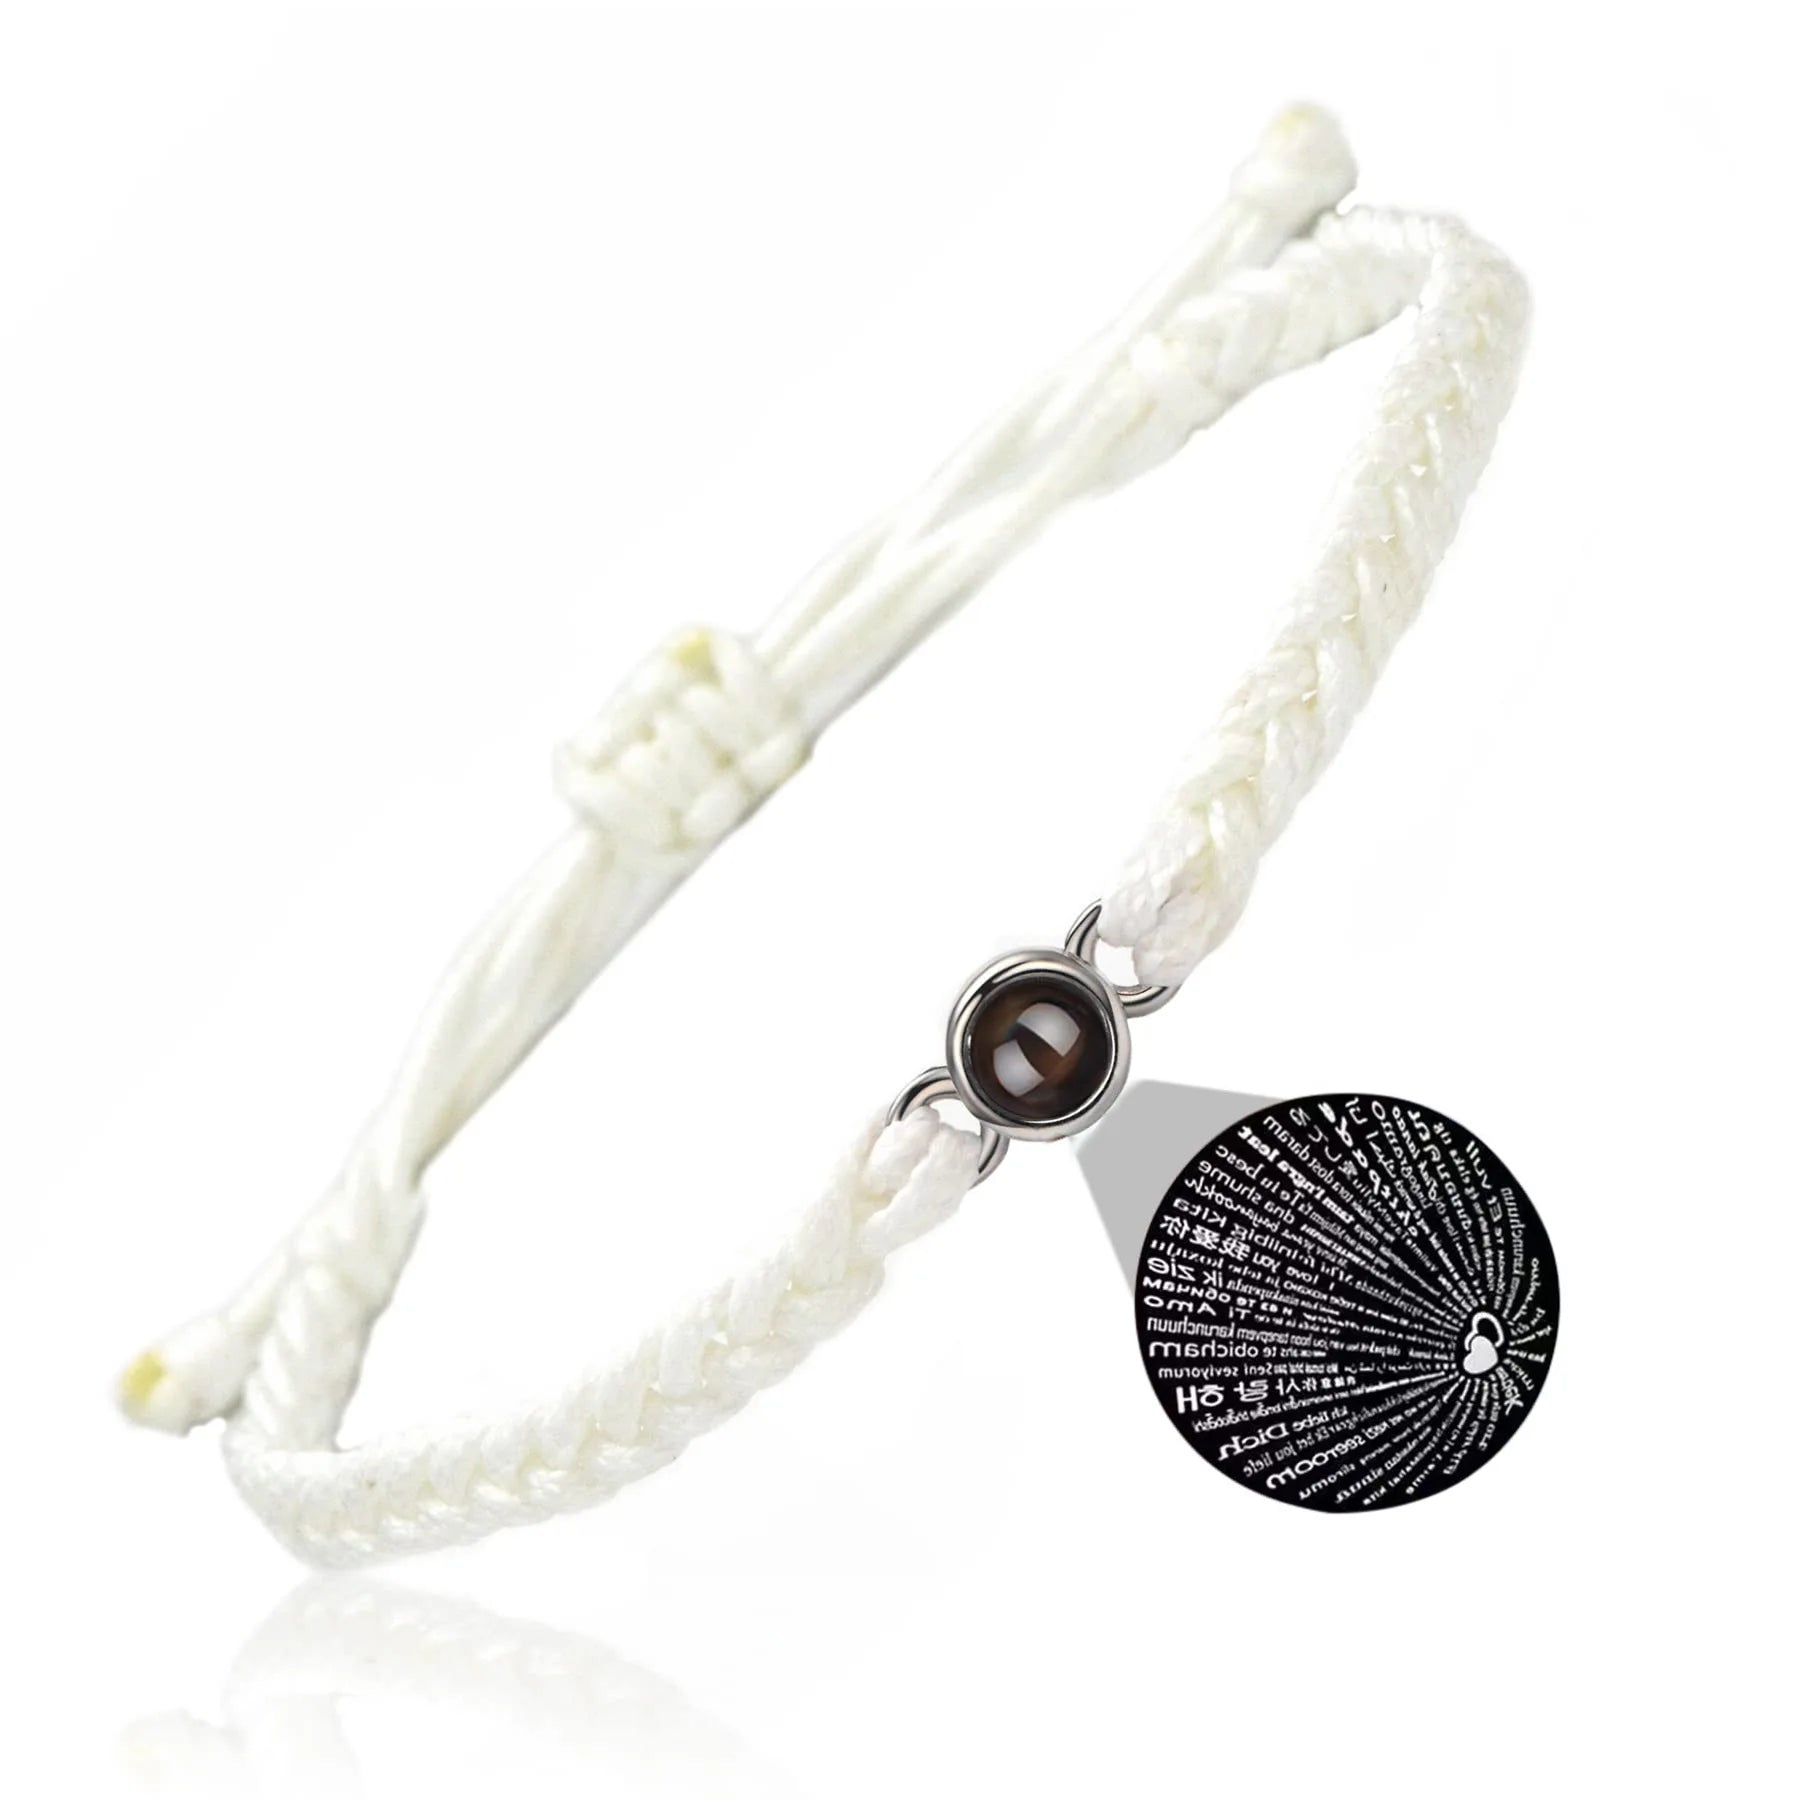 Projection Jewelry Classic Hand-Woven Ropes Custom Bracelets With Personalized Photos Suitable For Holiday Commemorative Gifts White and steel - IHavePaws